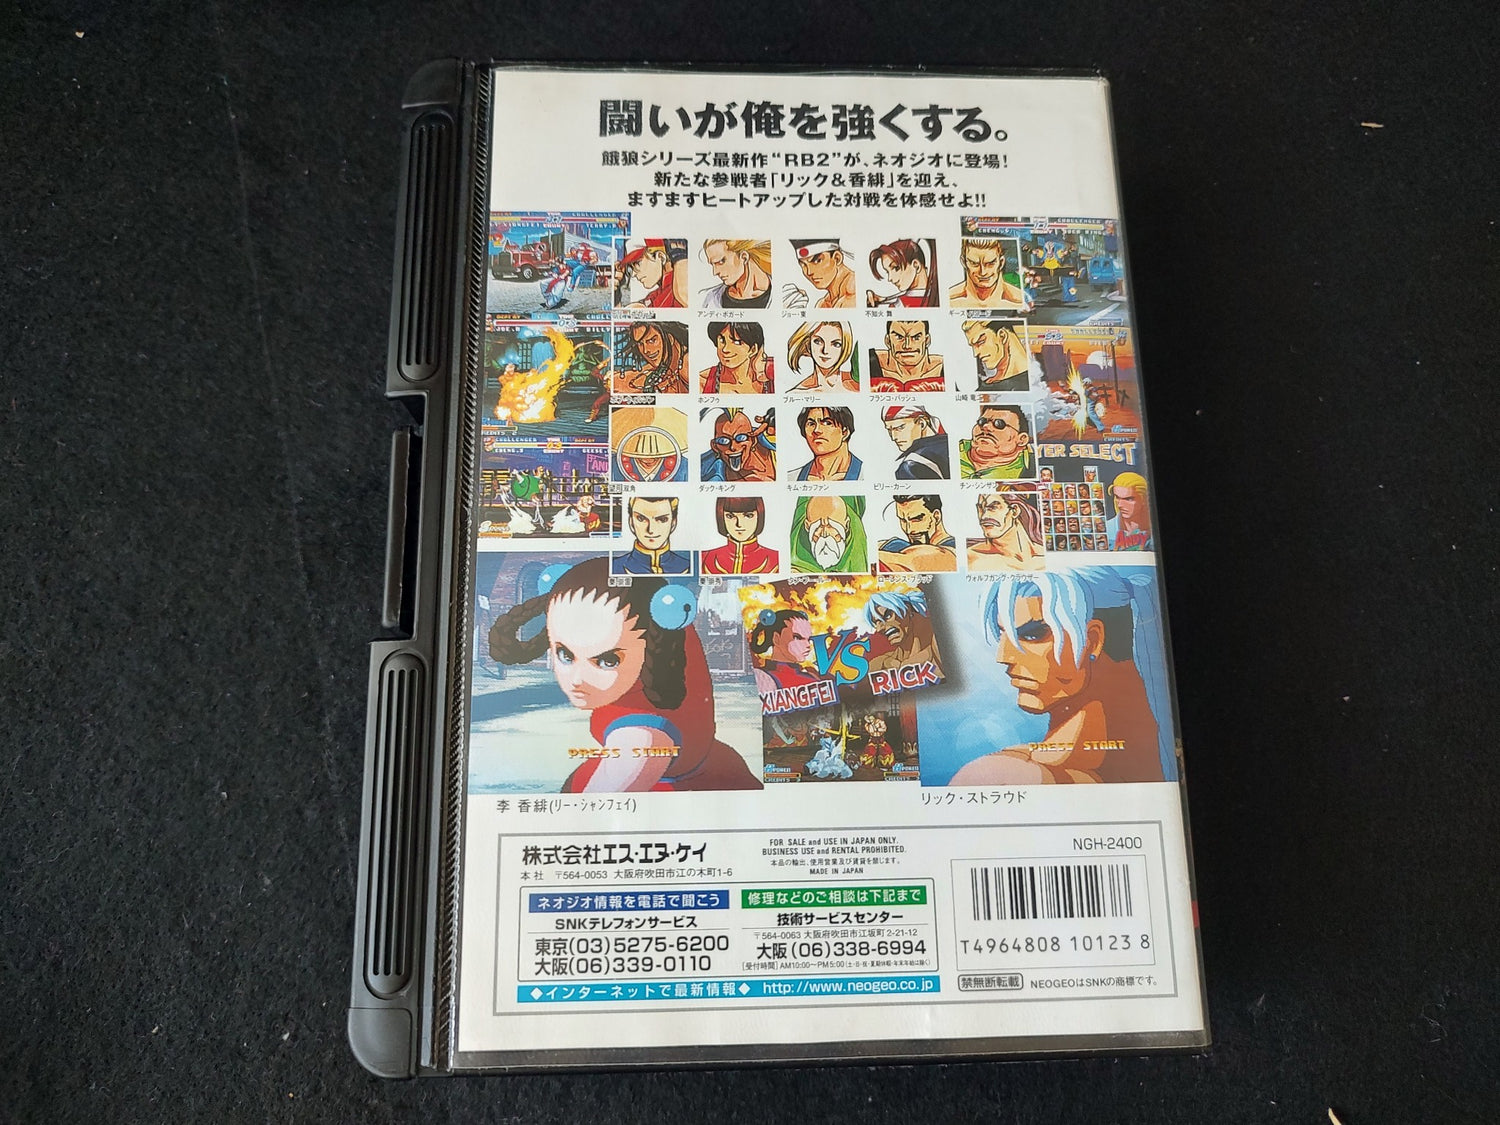 Fatal Fury 2 Prices JP Neo Geo AES